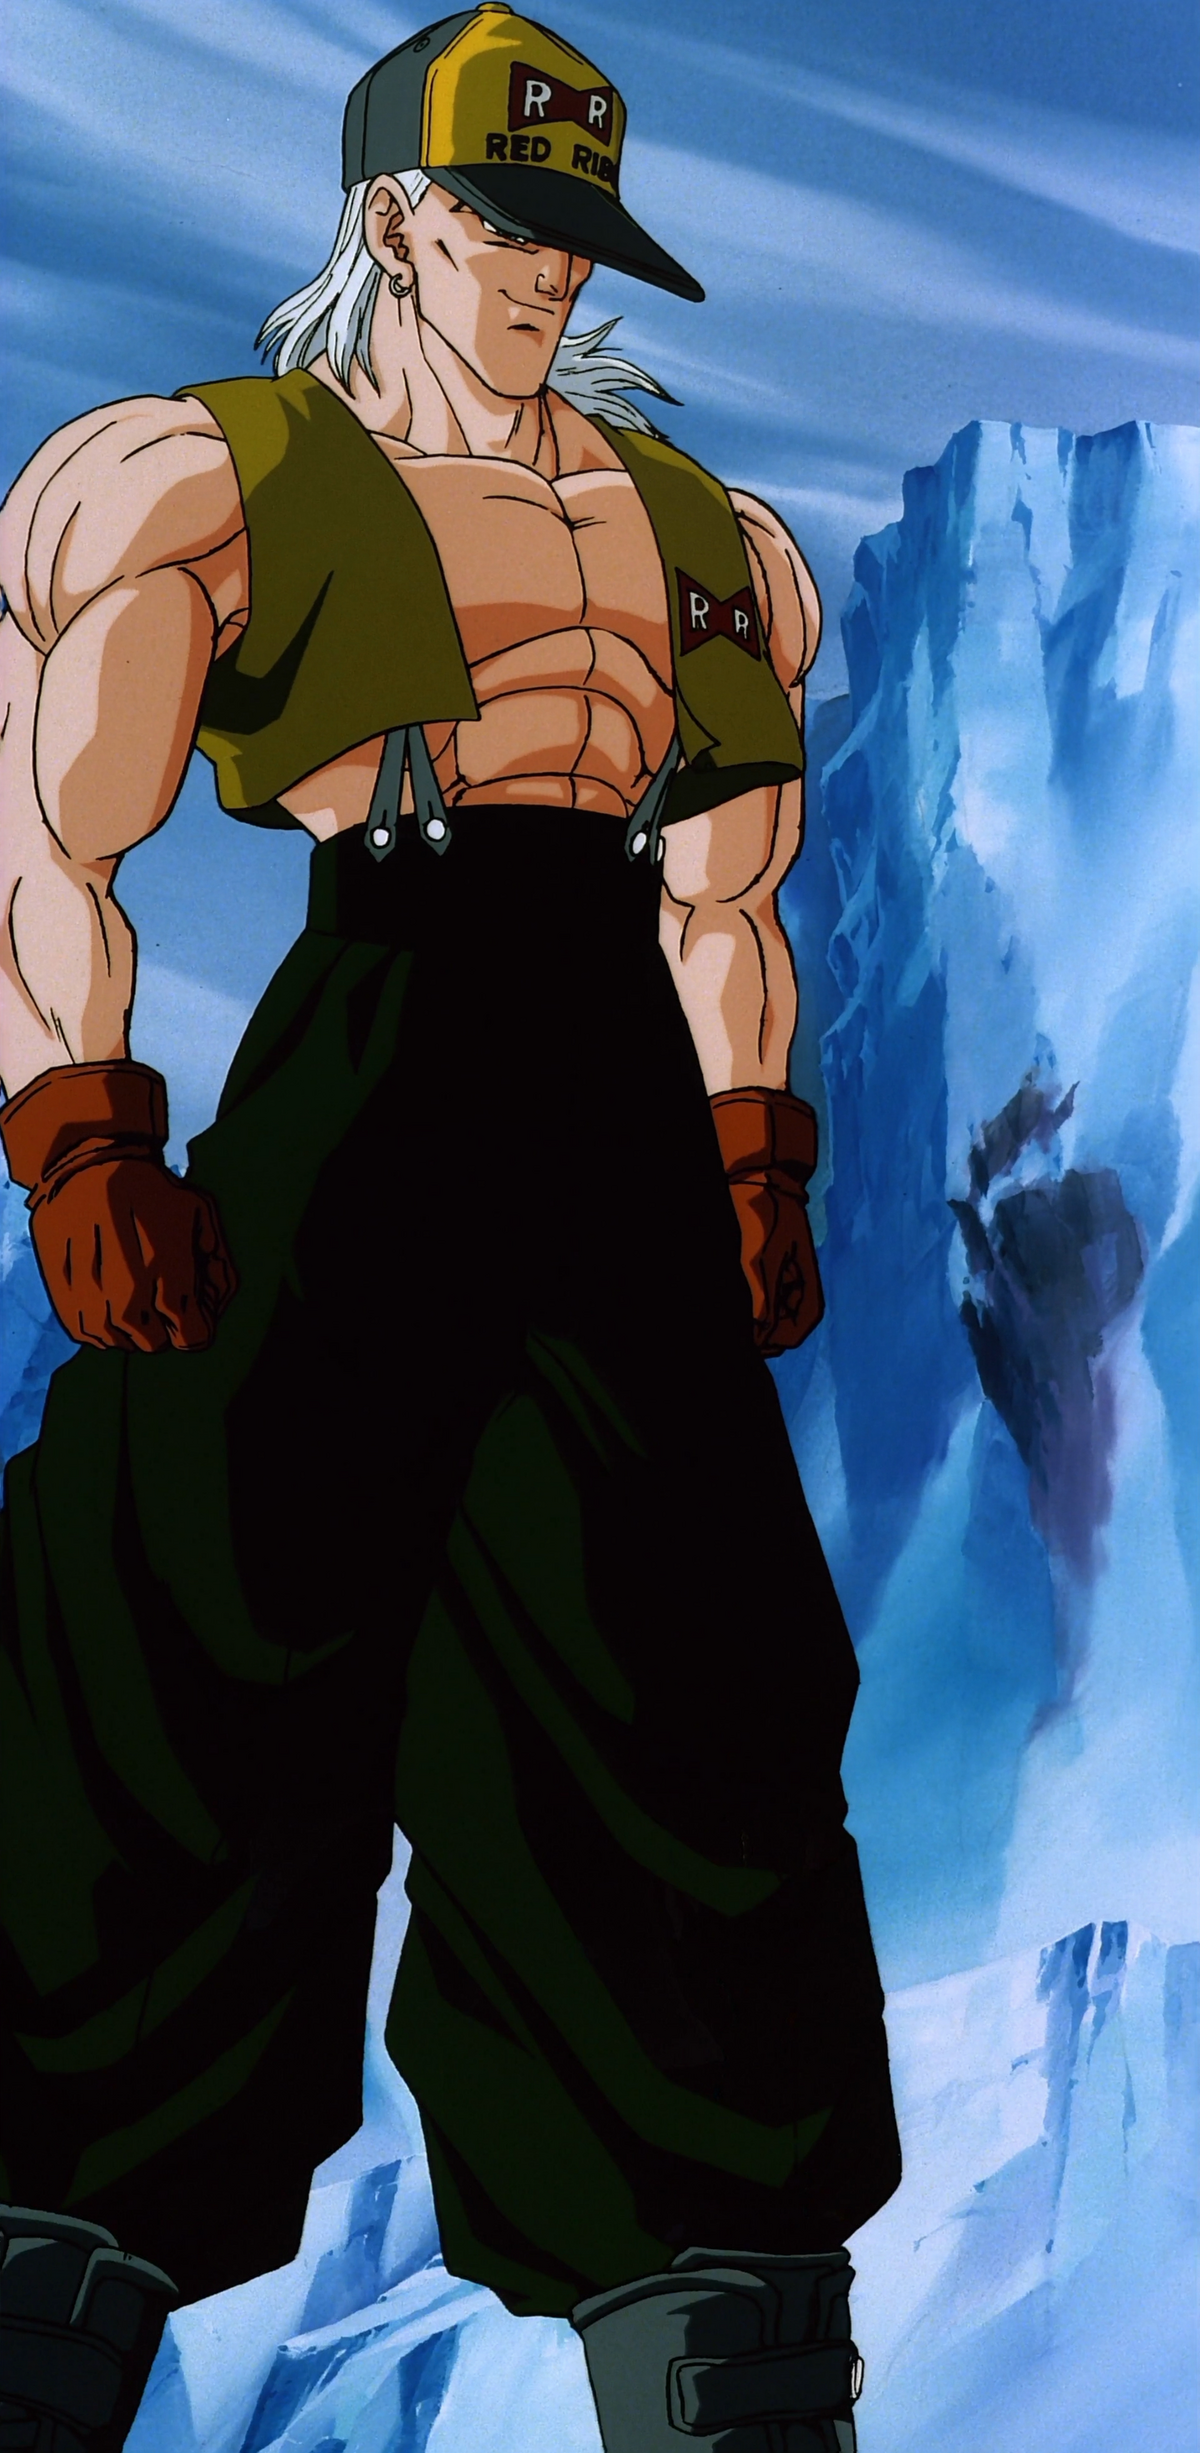 Dragon Ball Z: Super Android 13 Dragon Ball Z: Super Android 13 - Watch on  Crunchyroll